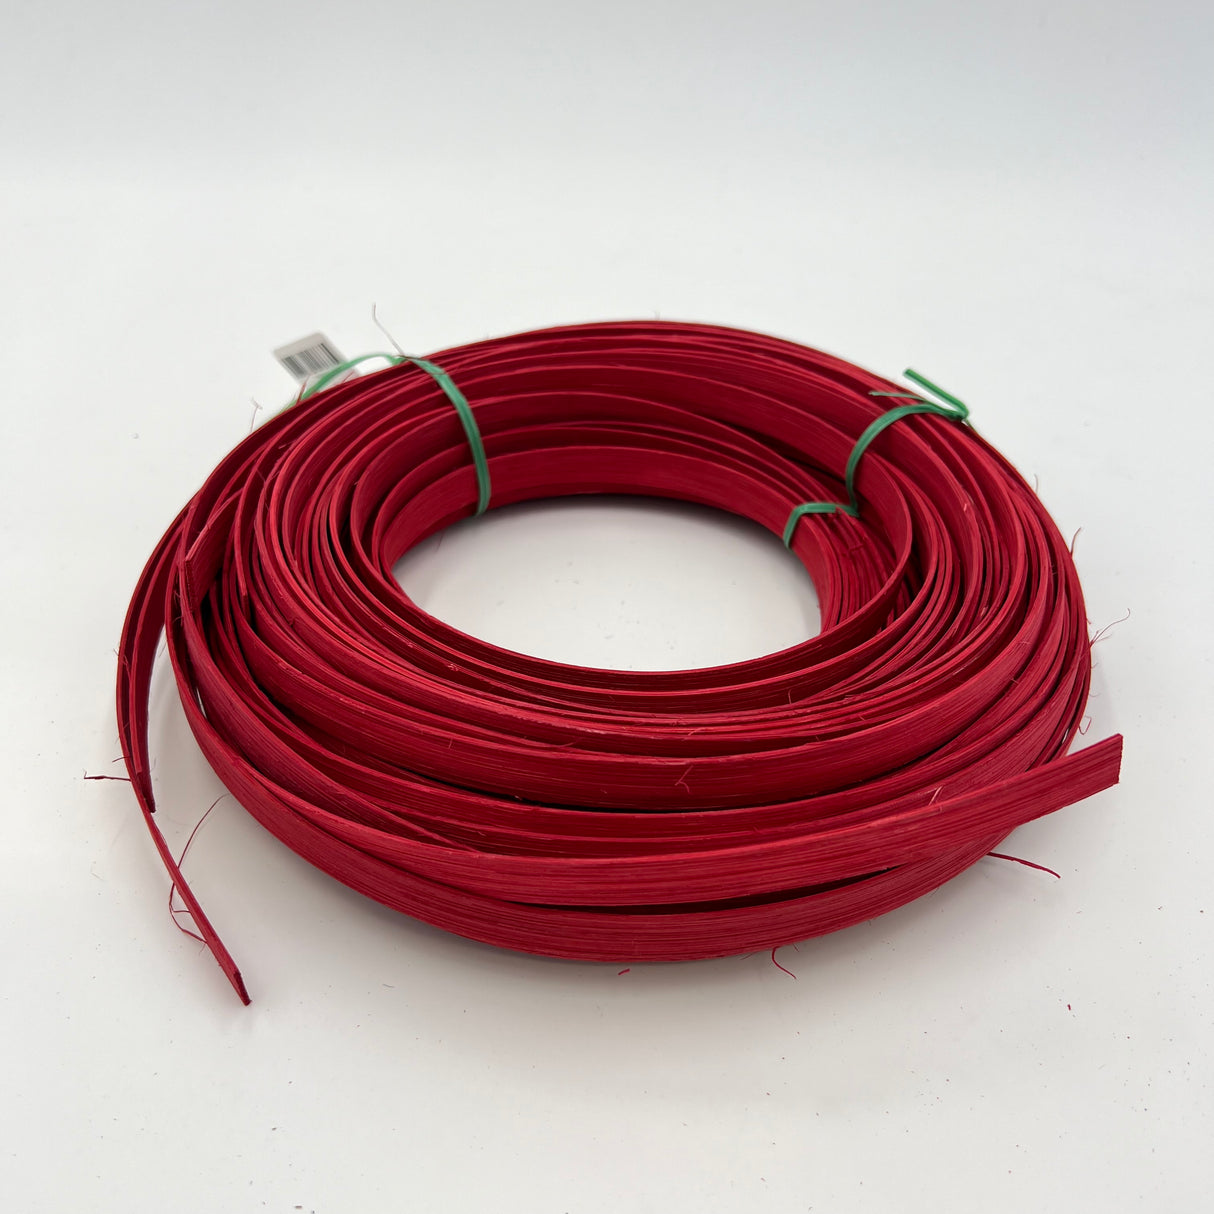 Christmas Red - 1/2" Flat - Dyed Reed (1/2 lb coil)